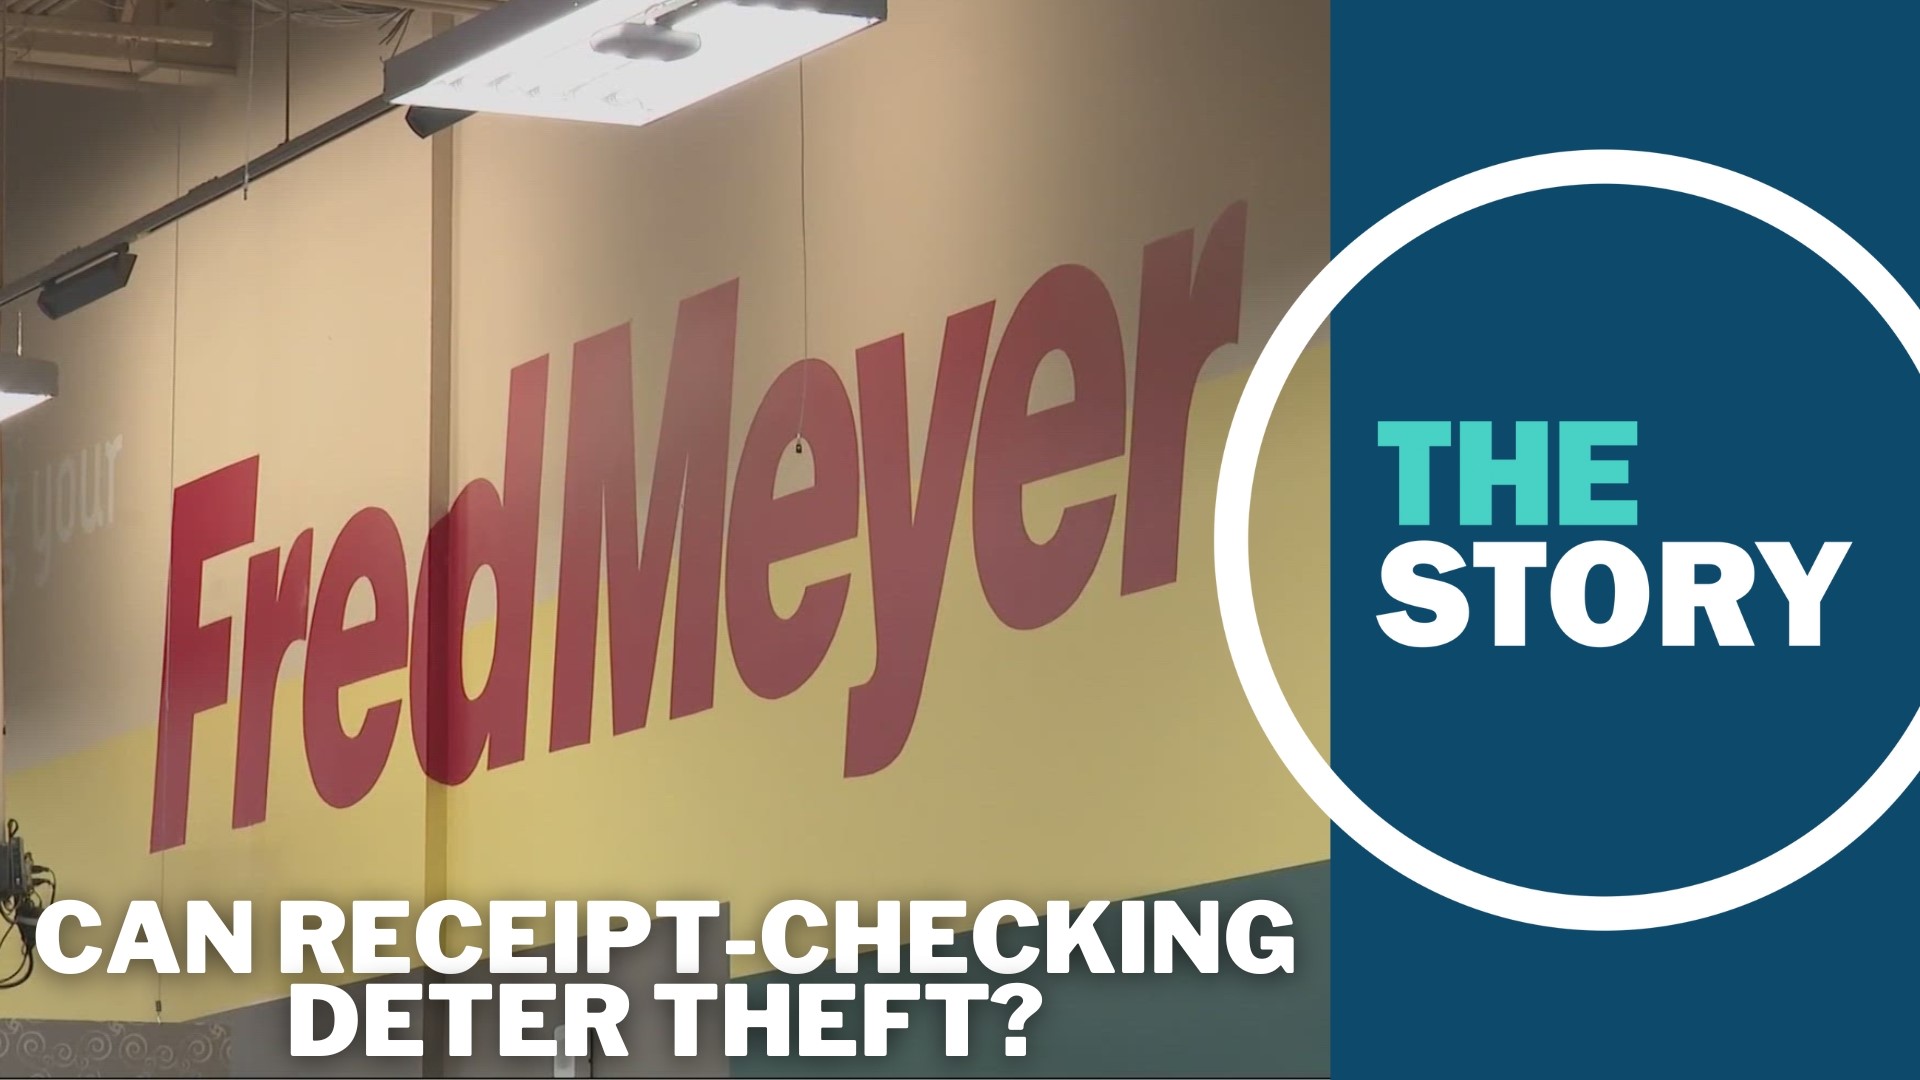 Stores are generally unlikely to detain customers who refuse receipt checks, although they could try to impose other penalties.